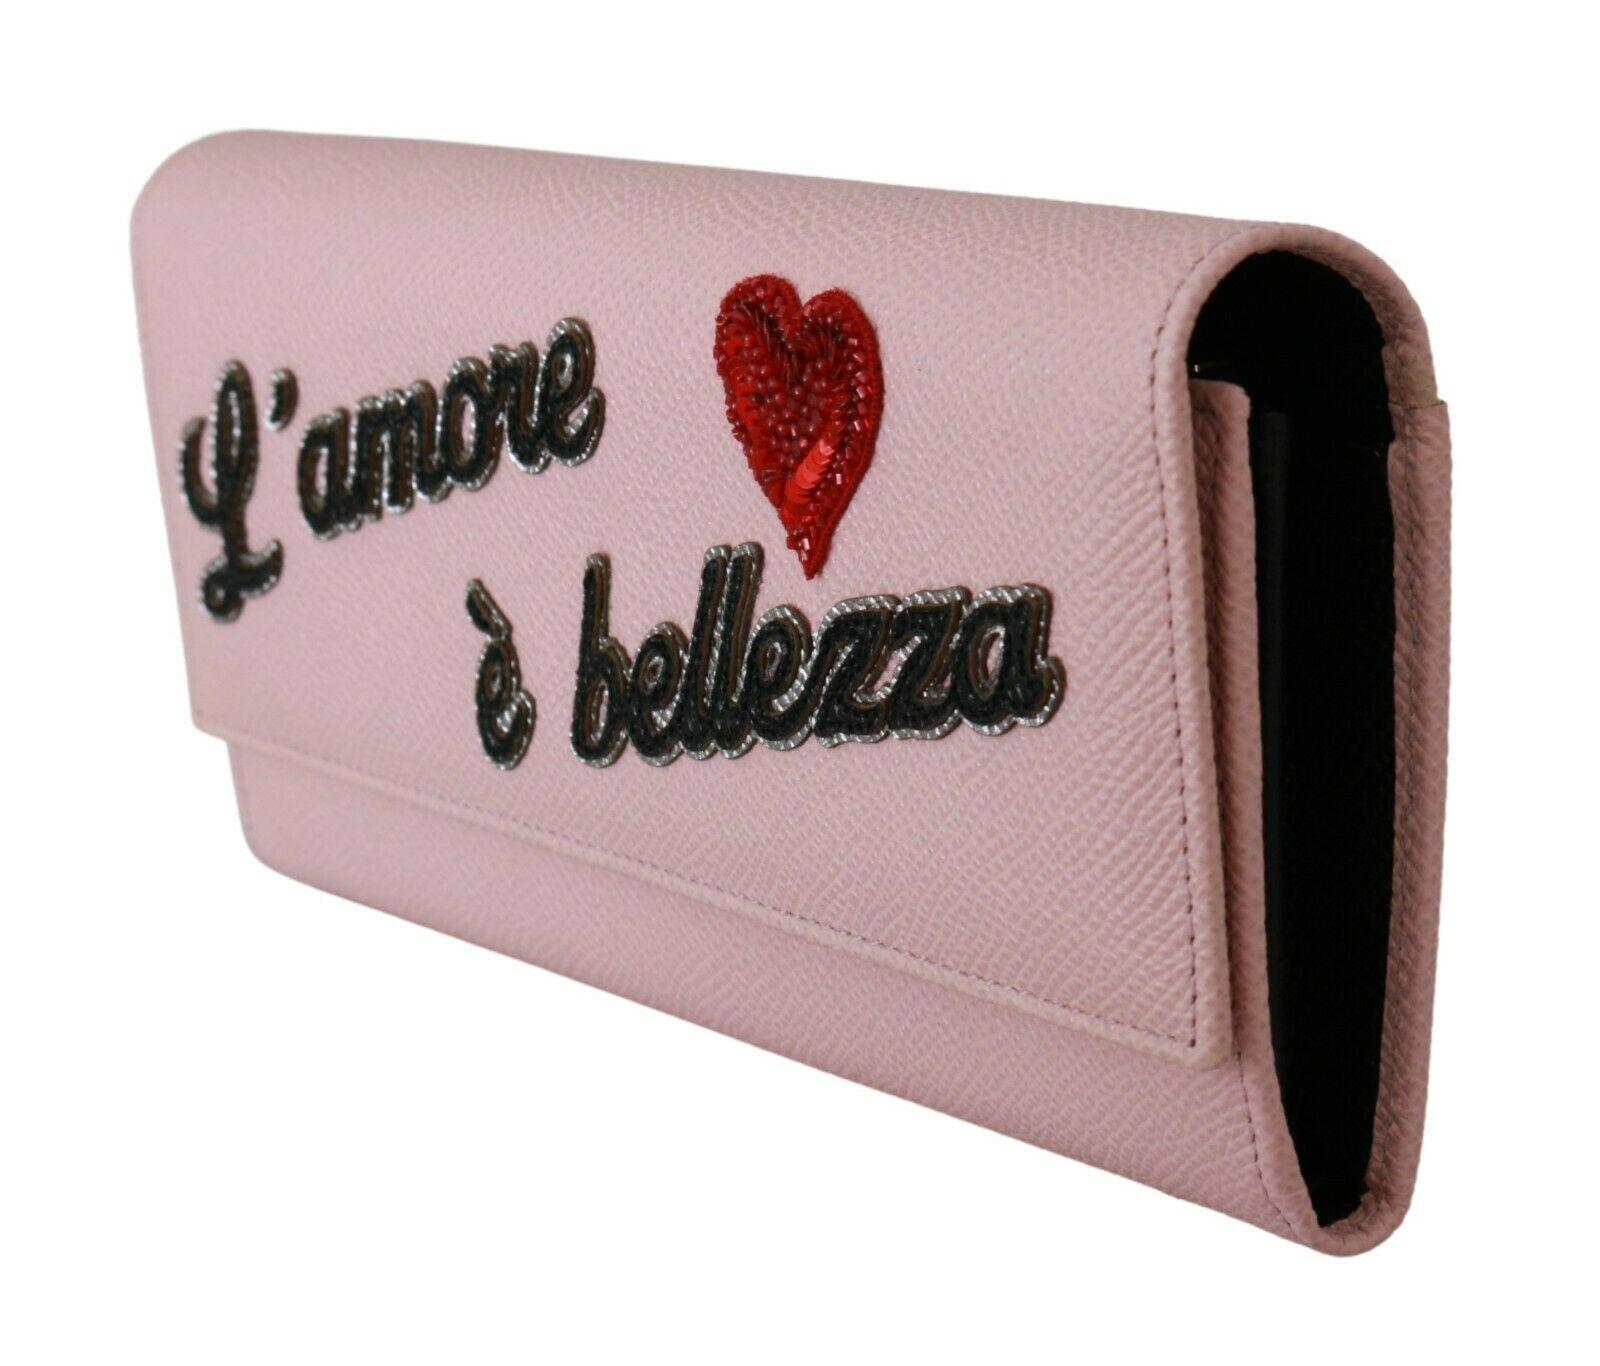 Gorgeous brand new with tags, 100% Authentic Dolce & Gabbana wallet.




Model: Continental wallet bifold clutch
Material: 100% Leather
Color: Pink, gold metal detailing
Motive: L'amore e' bellezza
Black inner lining
Cardholder slots and coin